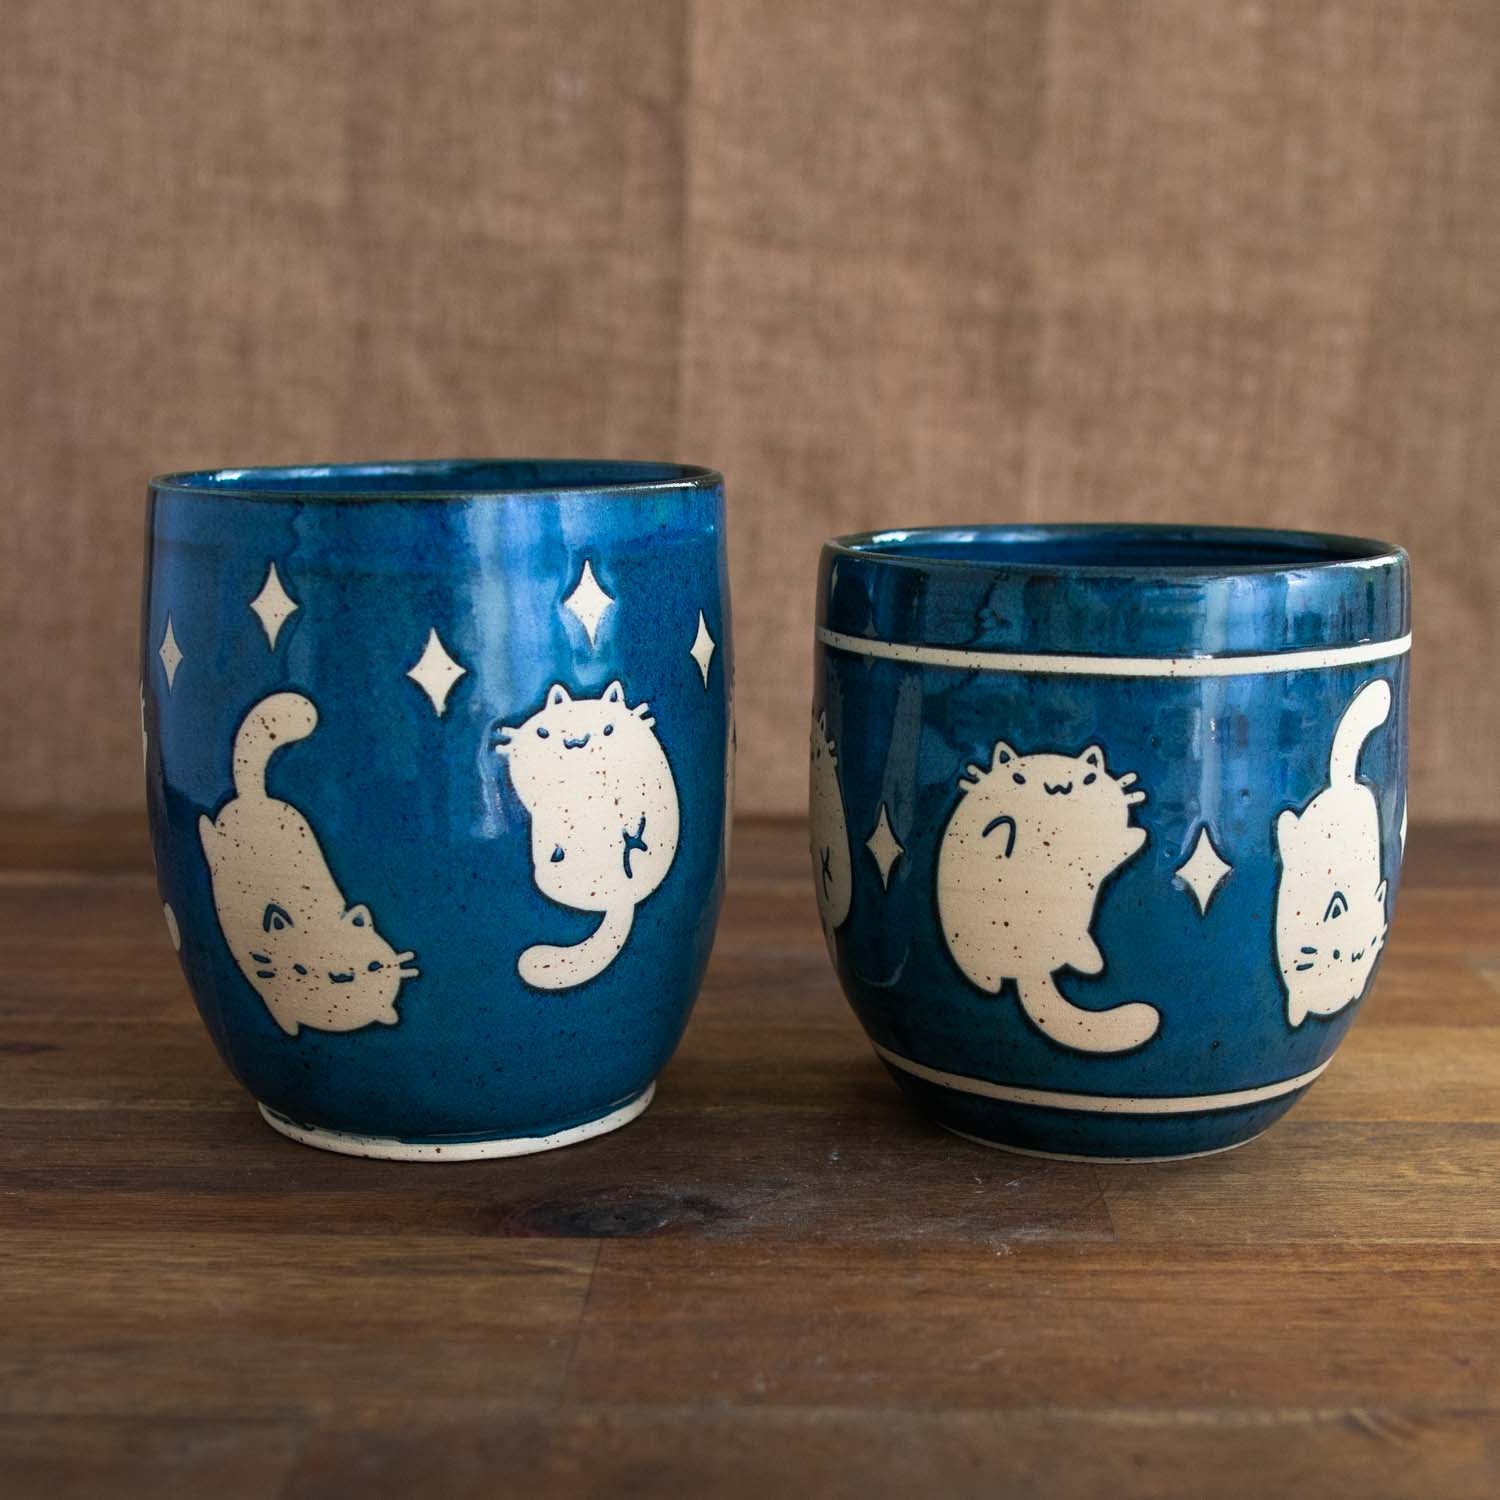 Space cats vase with accent lines